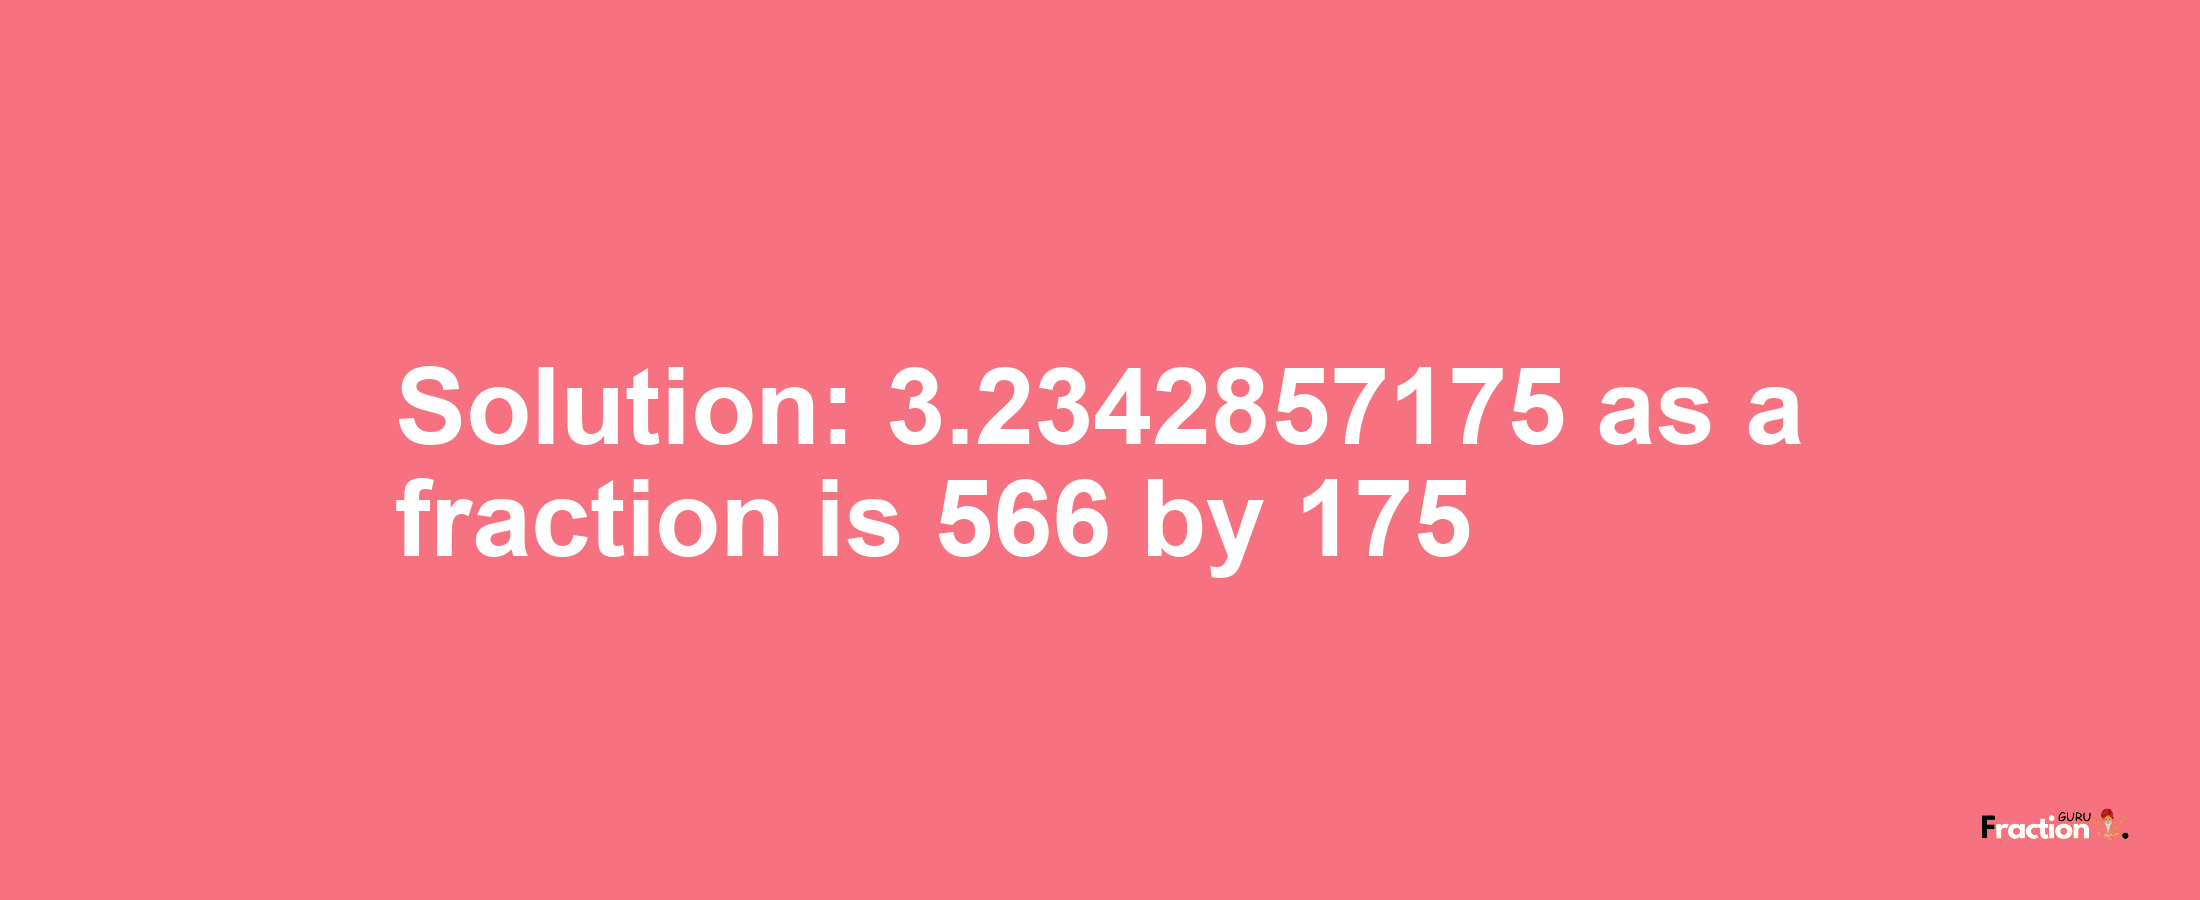 Solution:3.2342857175 as a fraction is 566/175